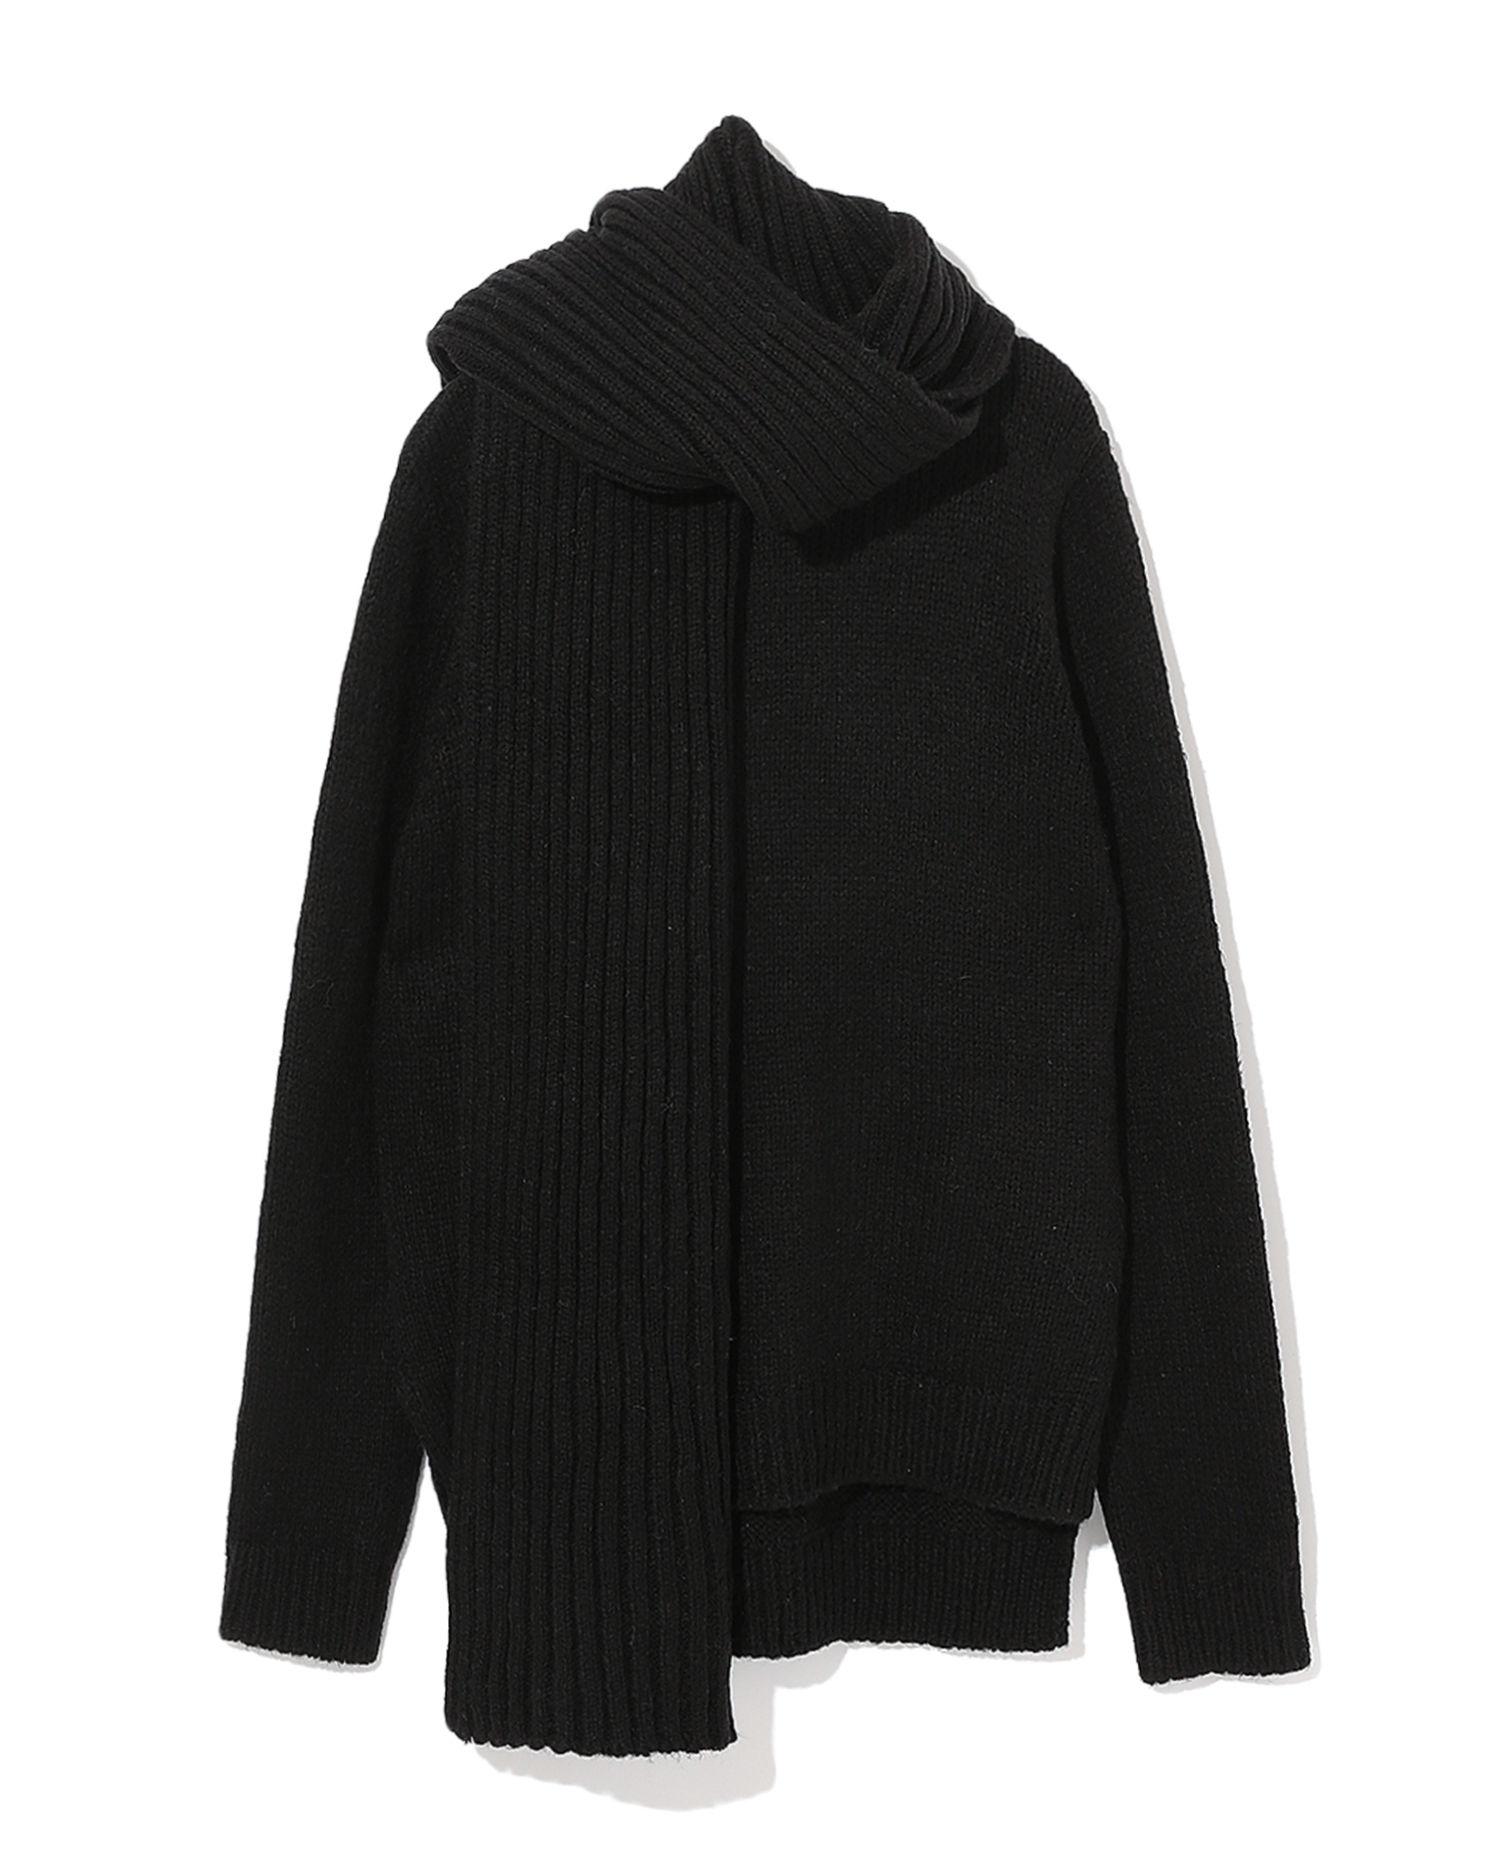 Scarf collar knit sweater by AMONG